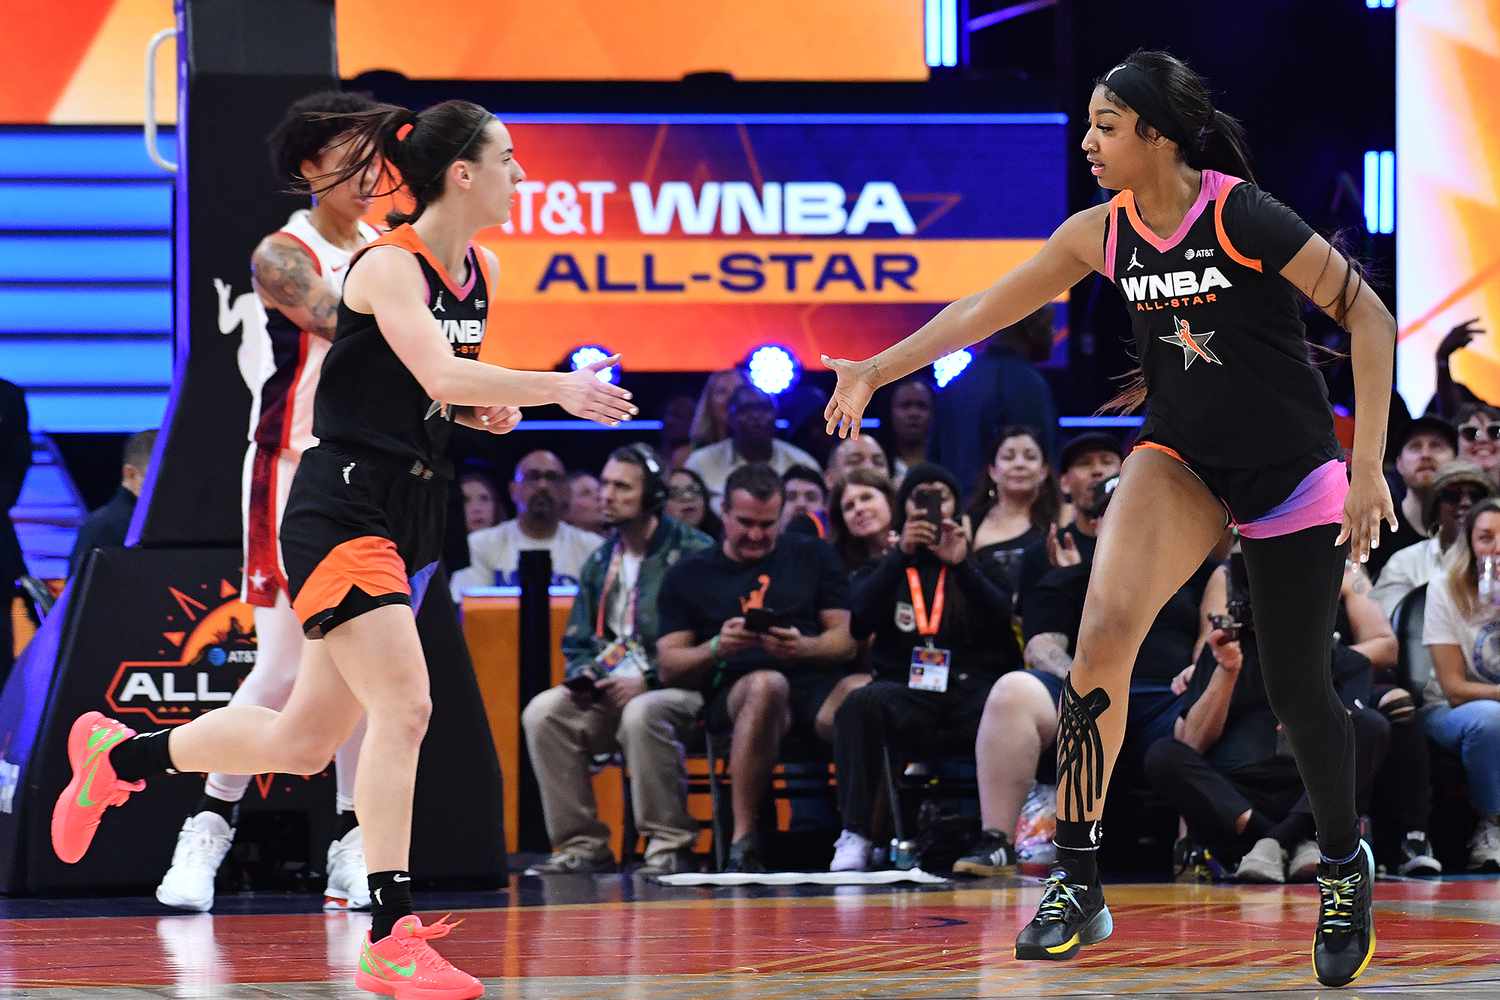 Caitlin Clark and Angel Reese Win WNBA All-Star Game Together as Legends Pack the Stands